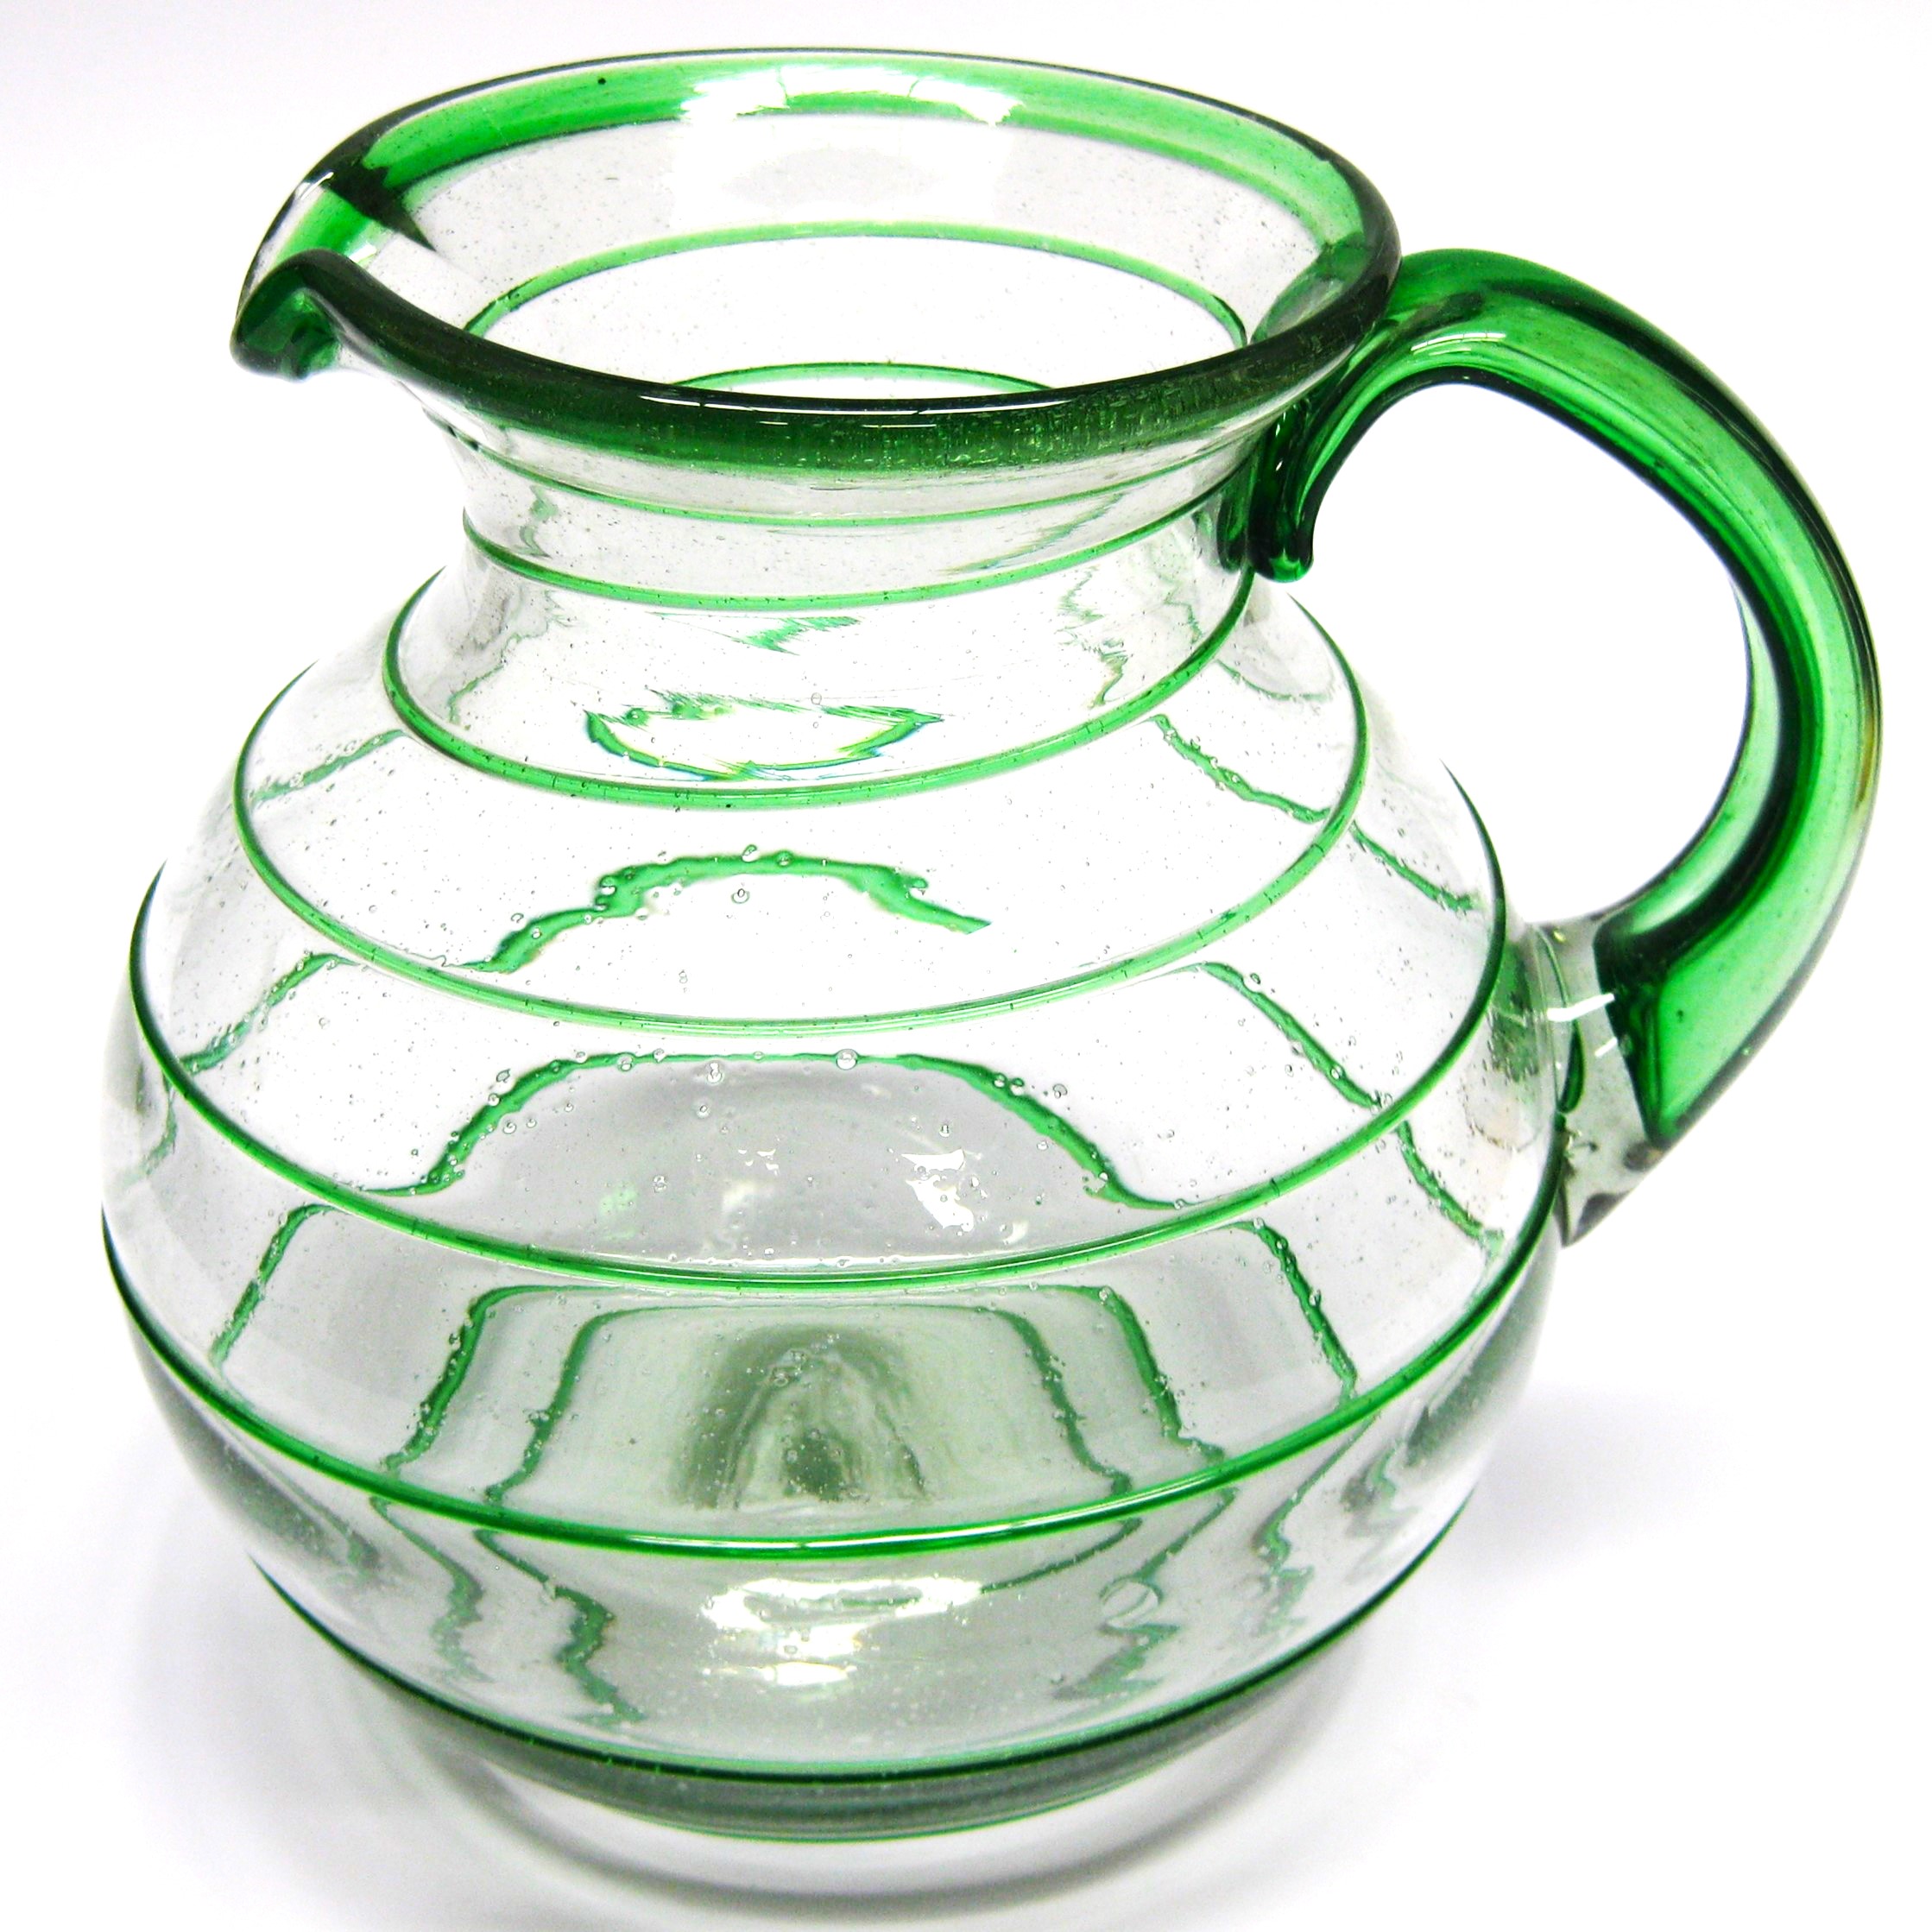 Wholesale MEXICAN GLASSWARE / Emerald Green Spiral 120 oz Large Bola Pitcher / A classic with a modern twist, this pitcher is adorned with a beautiful emerald green spiral.